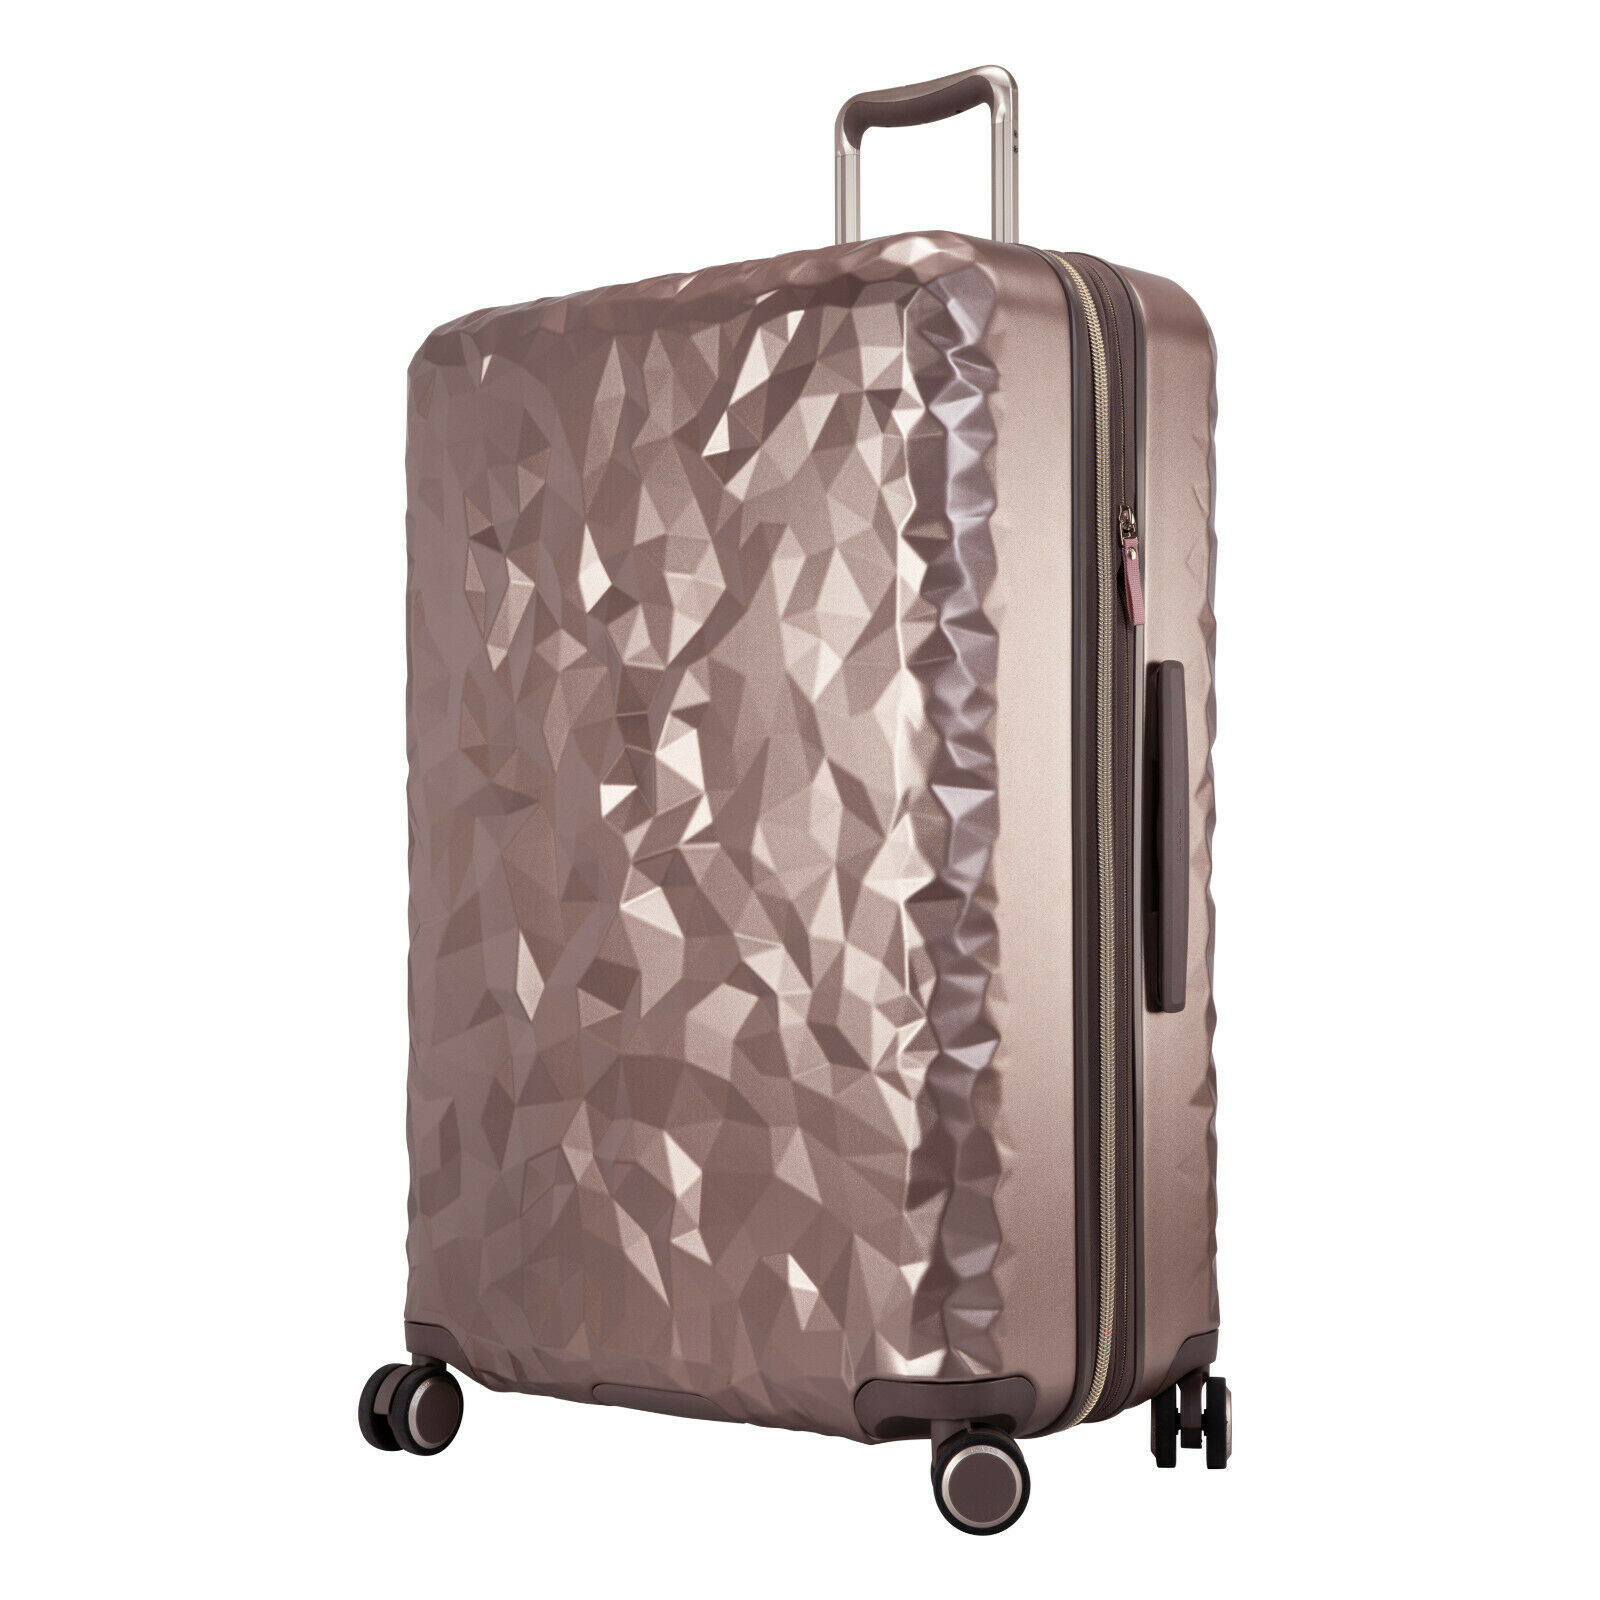 Ricardo Beverly Hills Indio Large Check-in Suitcase in Topaz